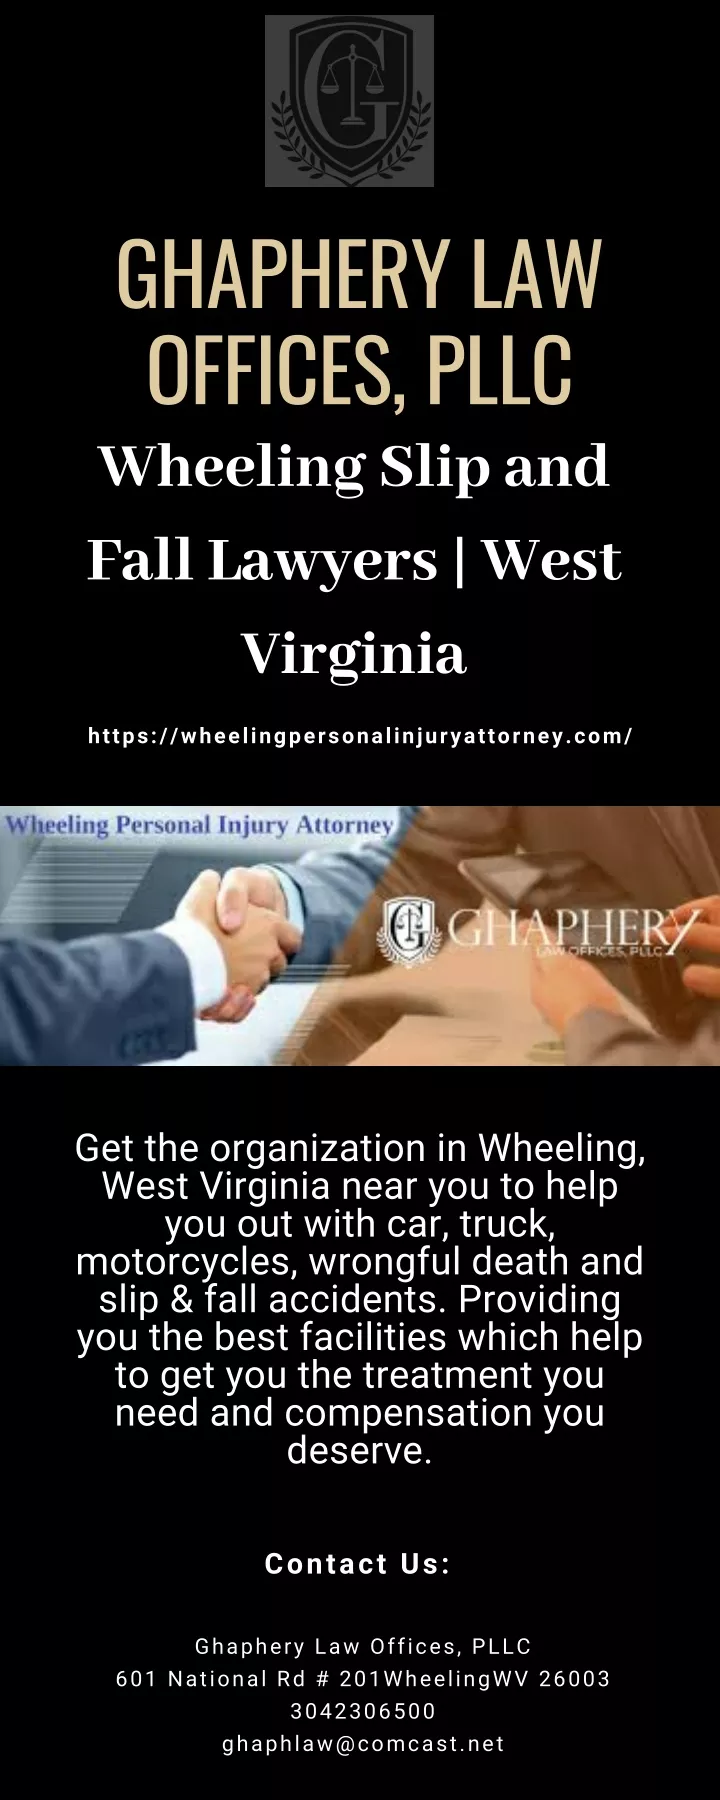 ghaphery law offices pllc wheeling slip and fall